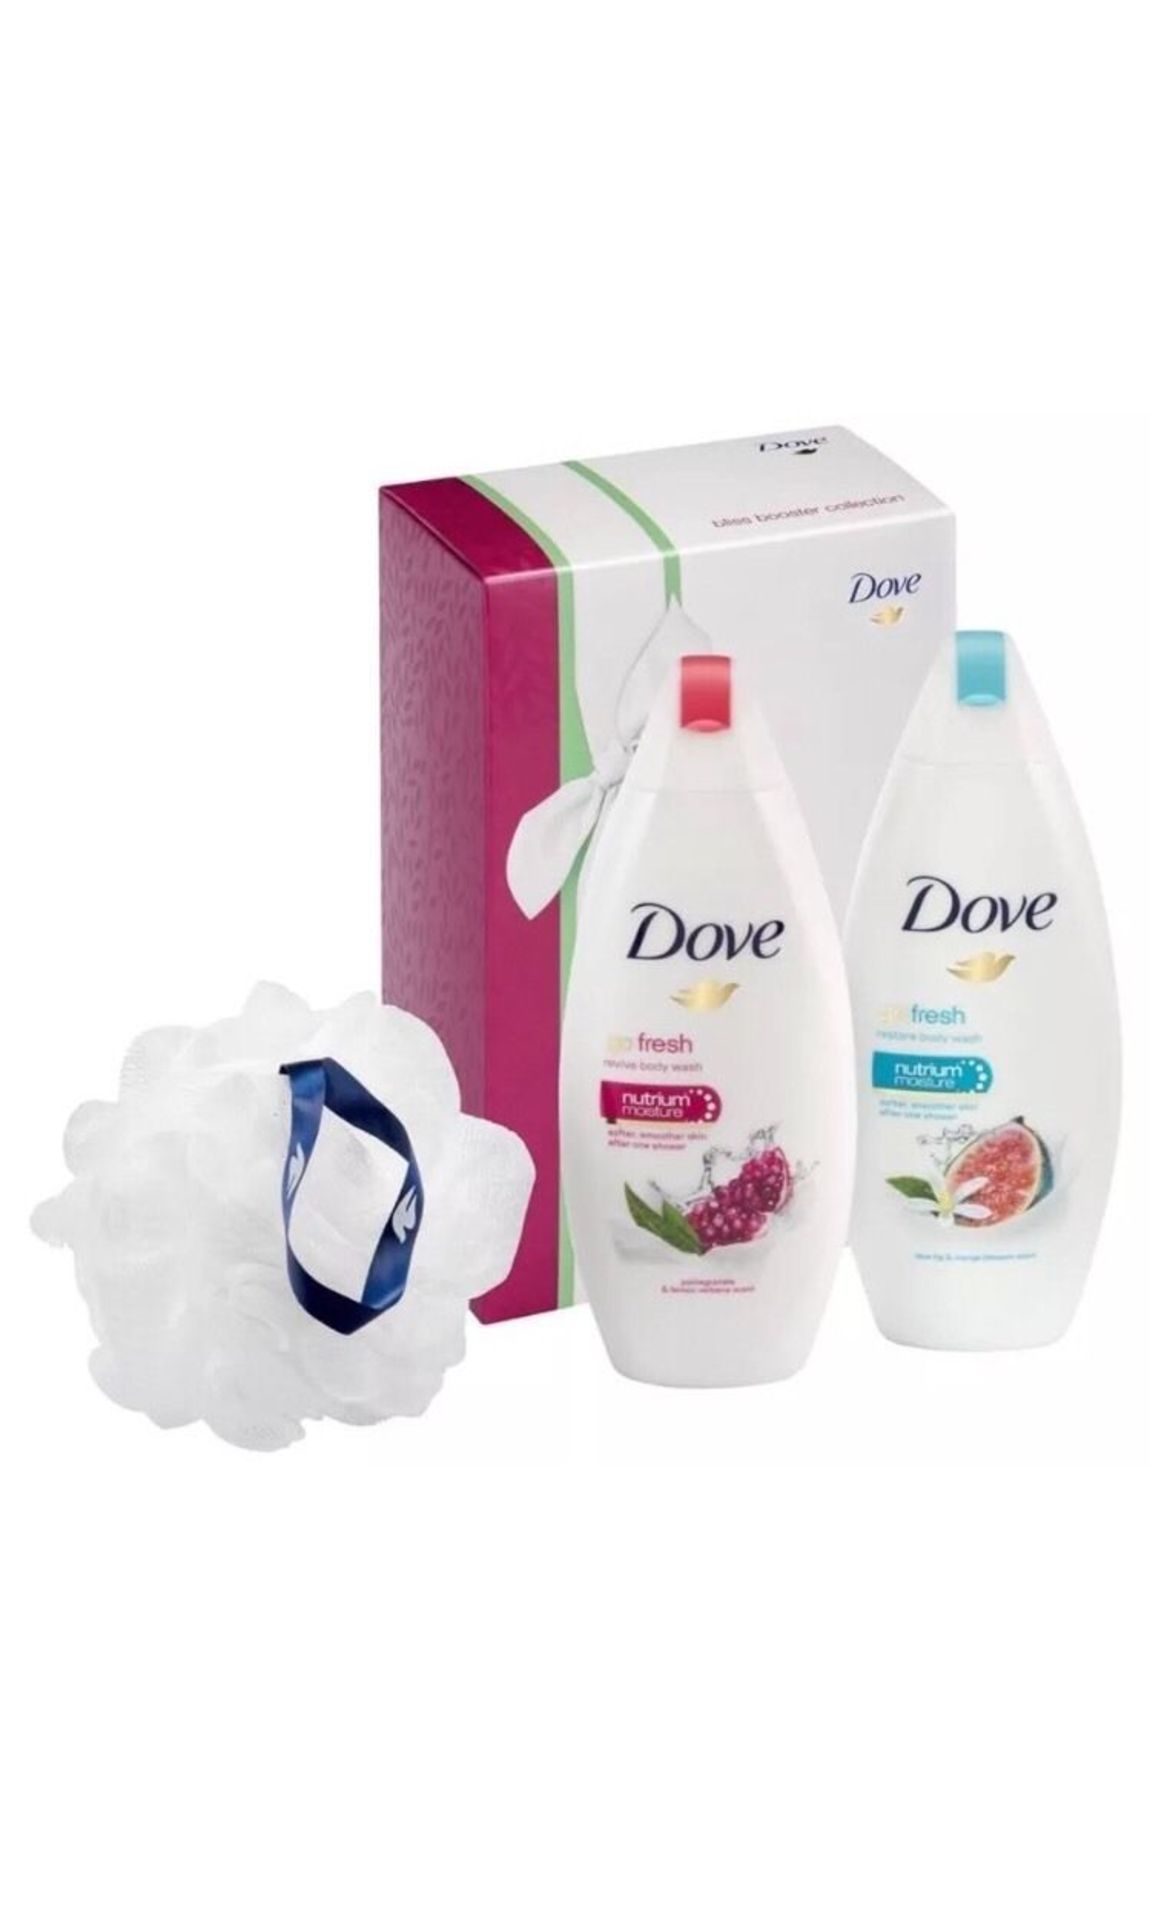 V Brand New Dove Bliss Booster Gift Set Includes 1 x 250ml - ISP £7.99